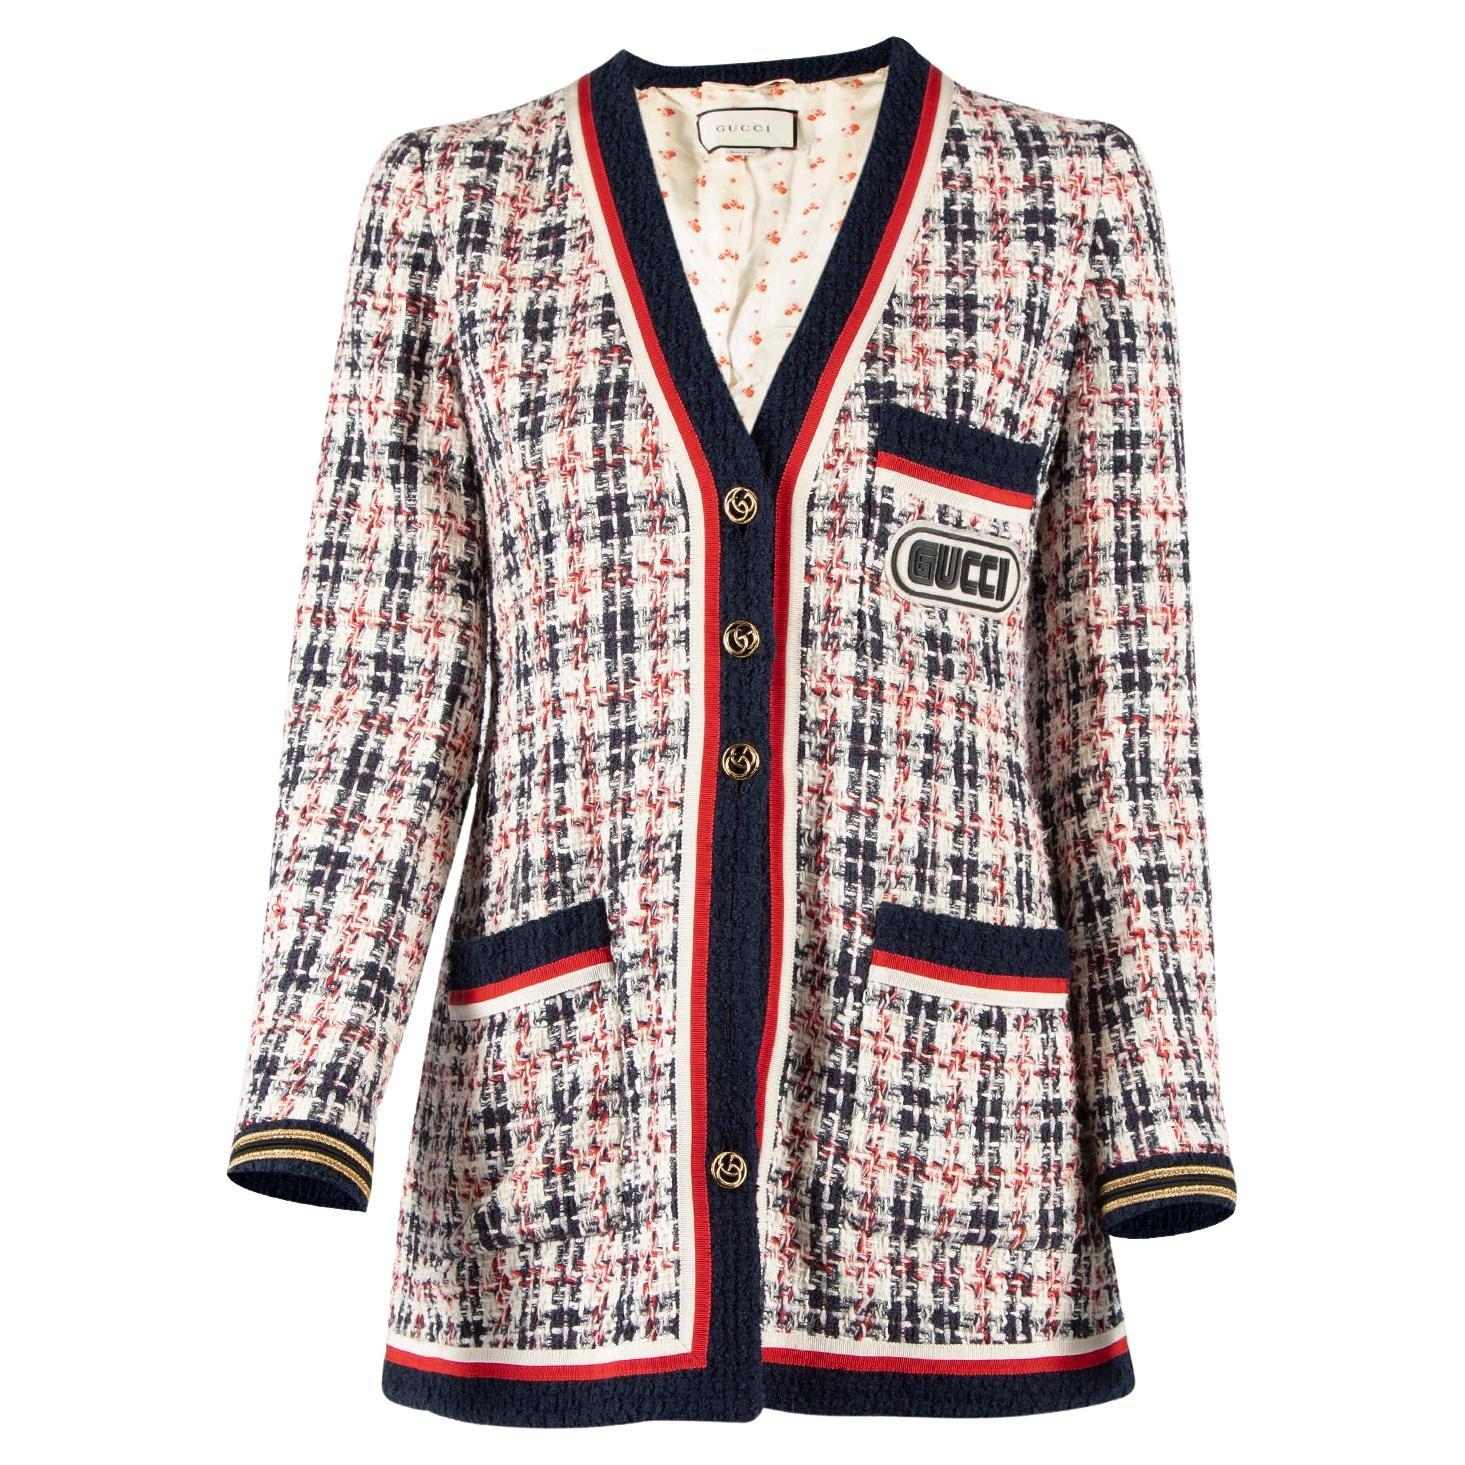 Pre-Loved Gucci Women's Tweed Multicoloured Cardigan Style Jacket